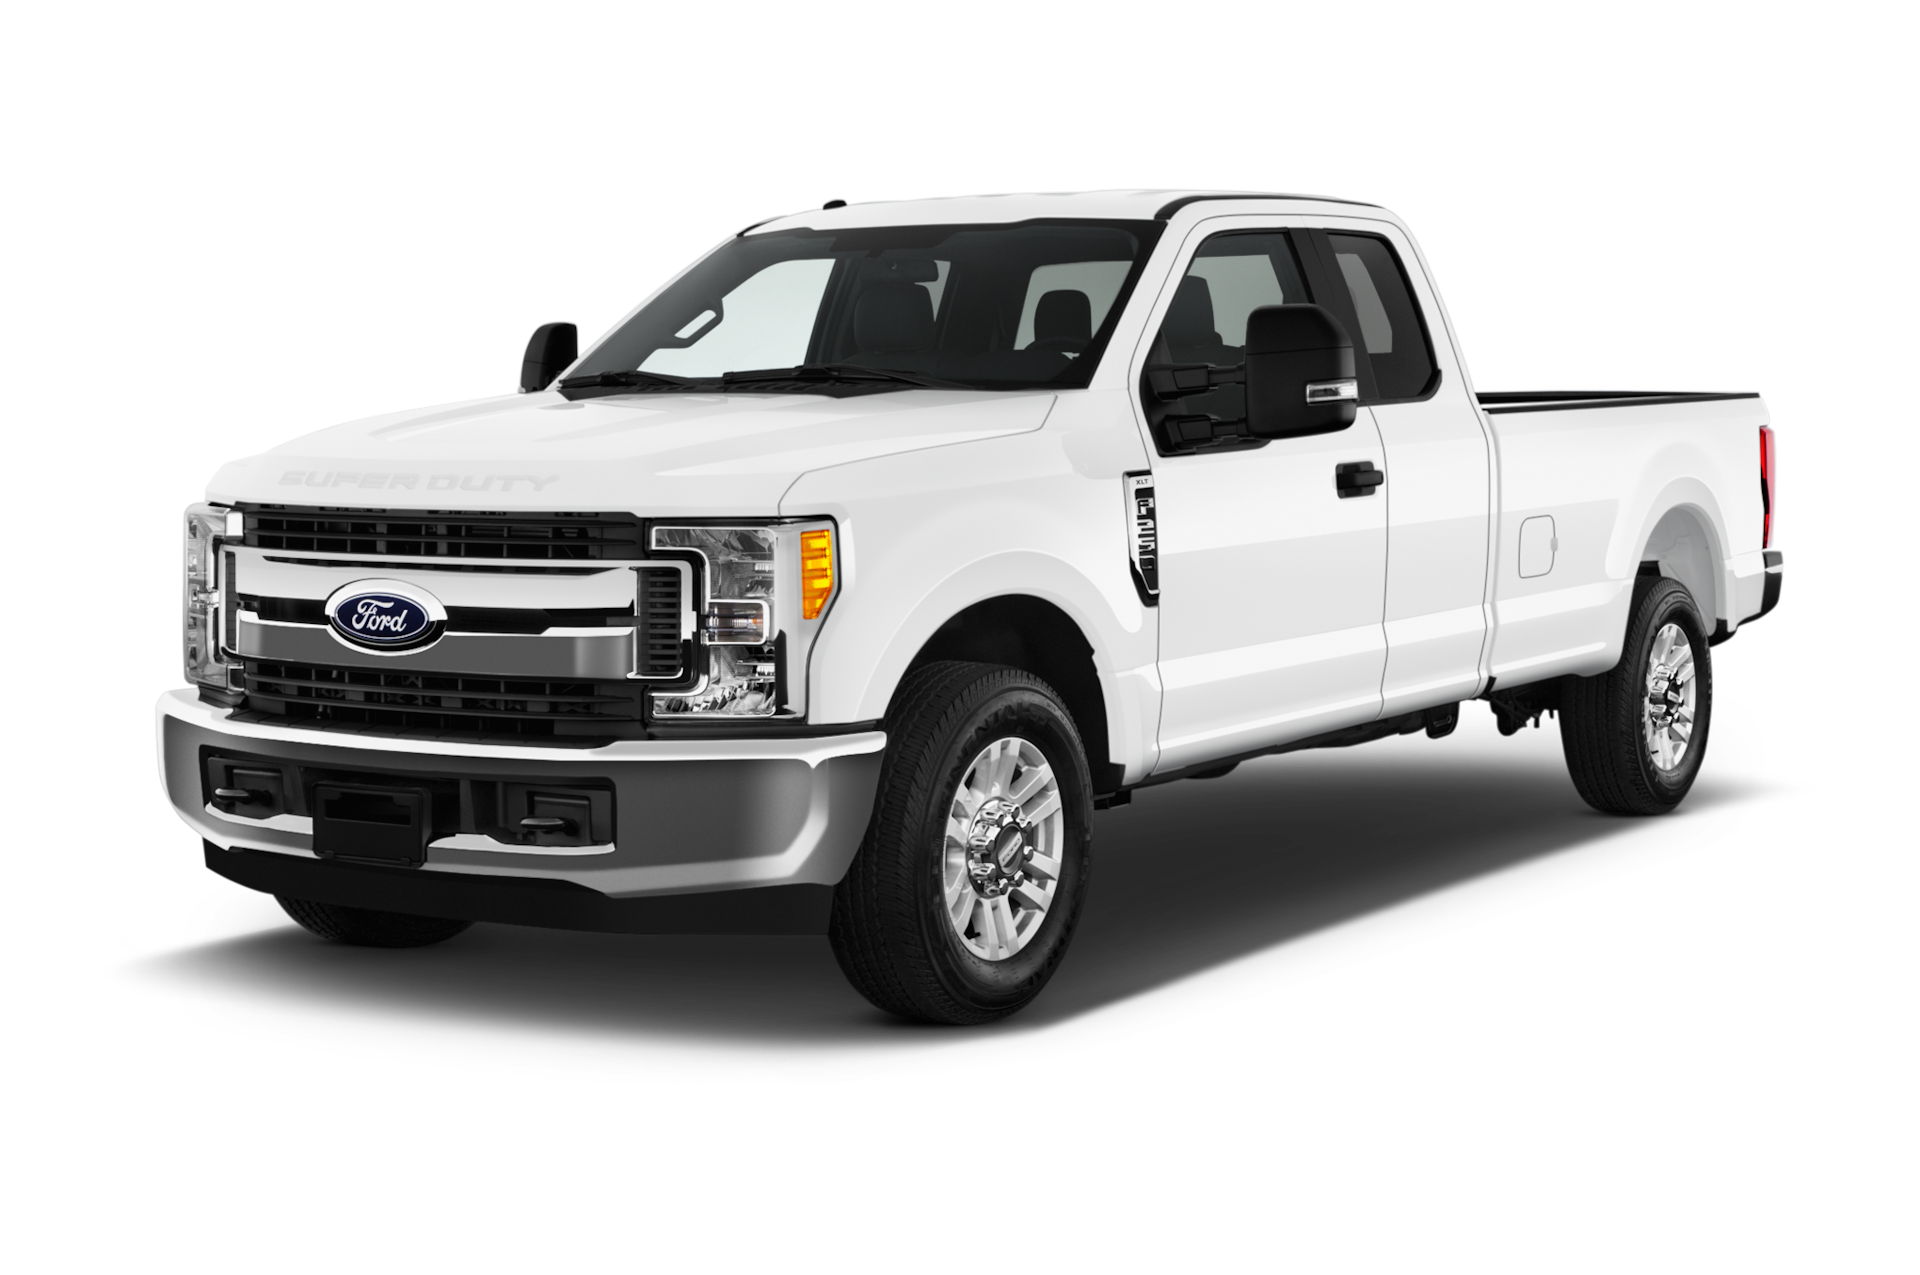 2018 Ford F-250 Prices, Reviews, and Photos - MotorTrend